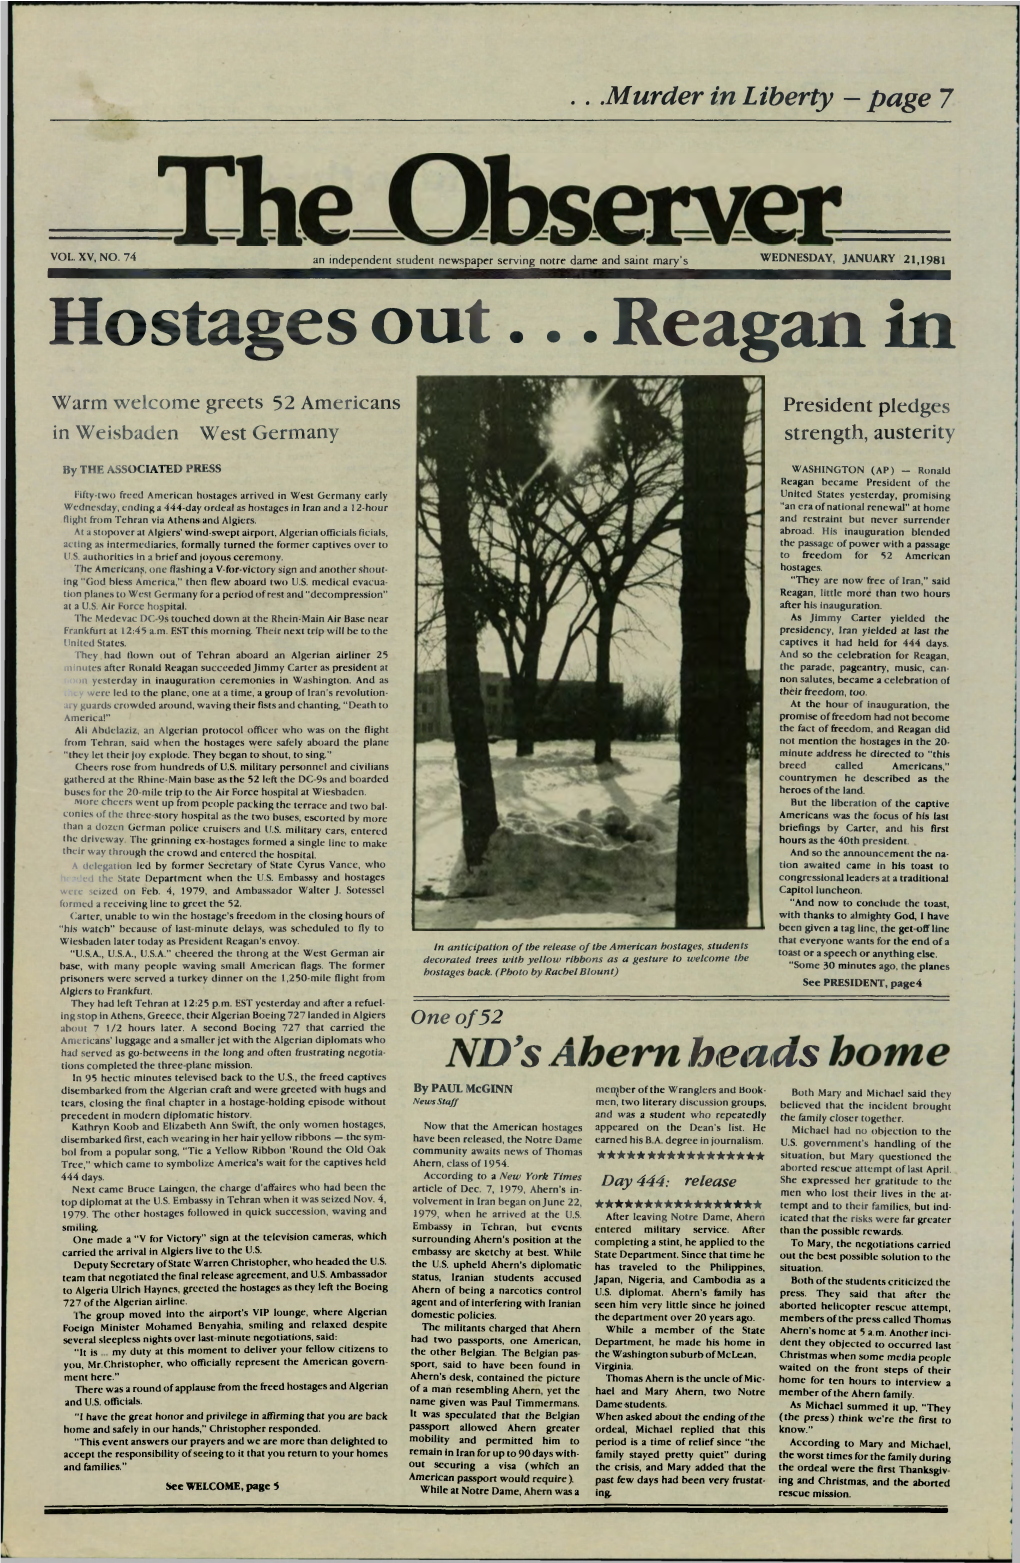 Hostages Out... Reagan In